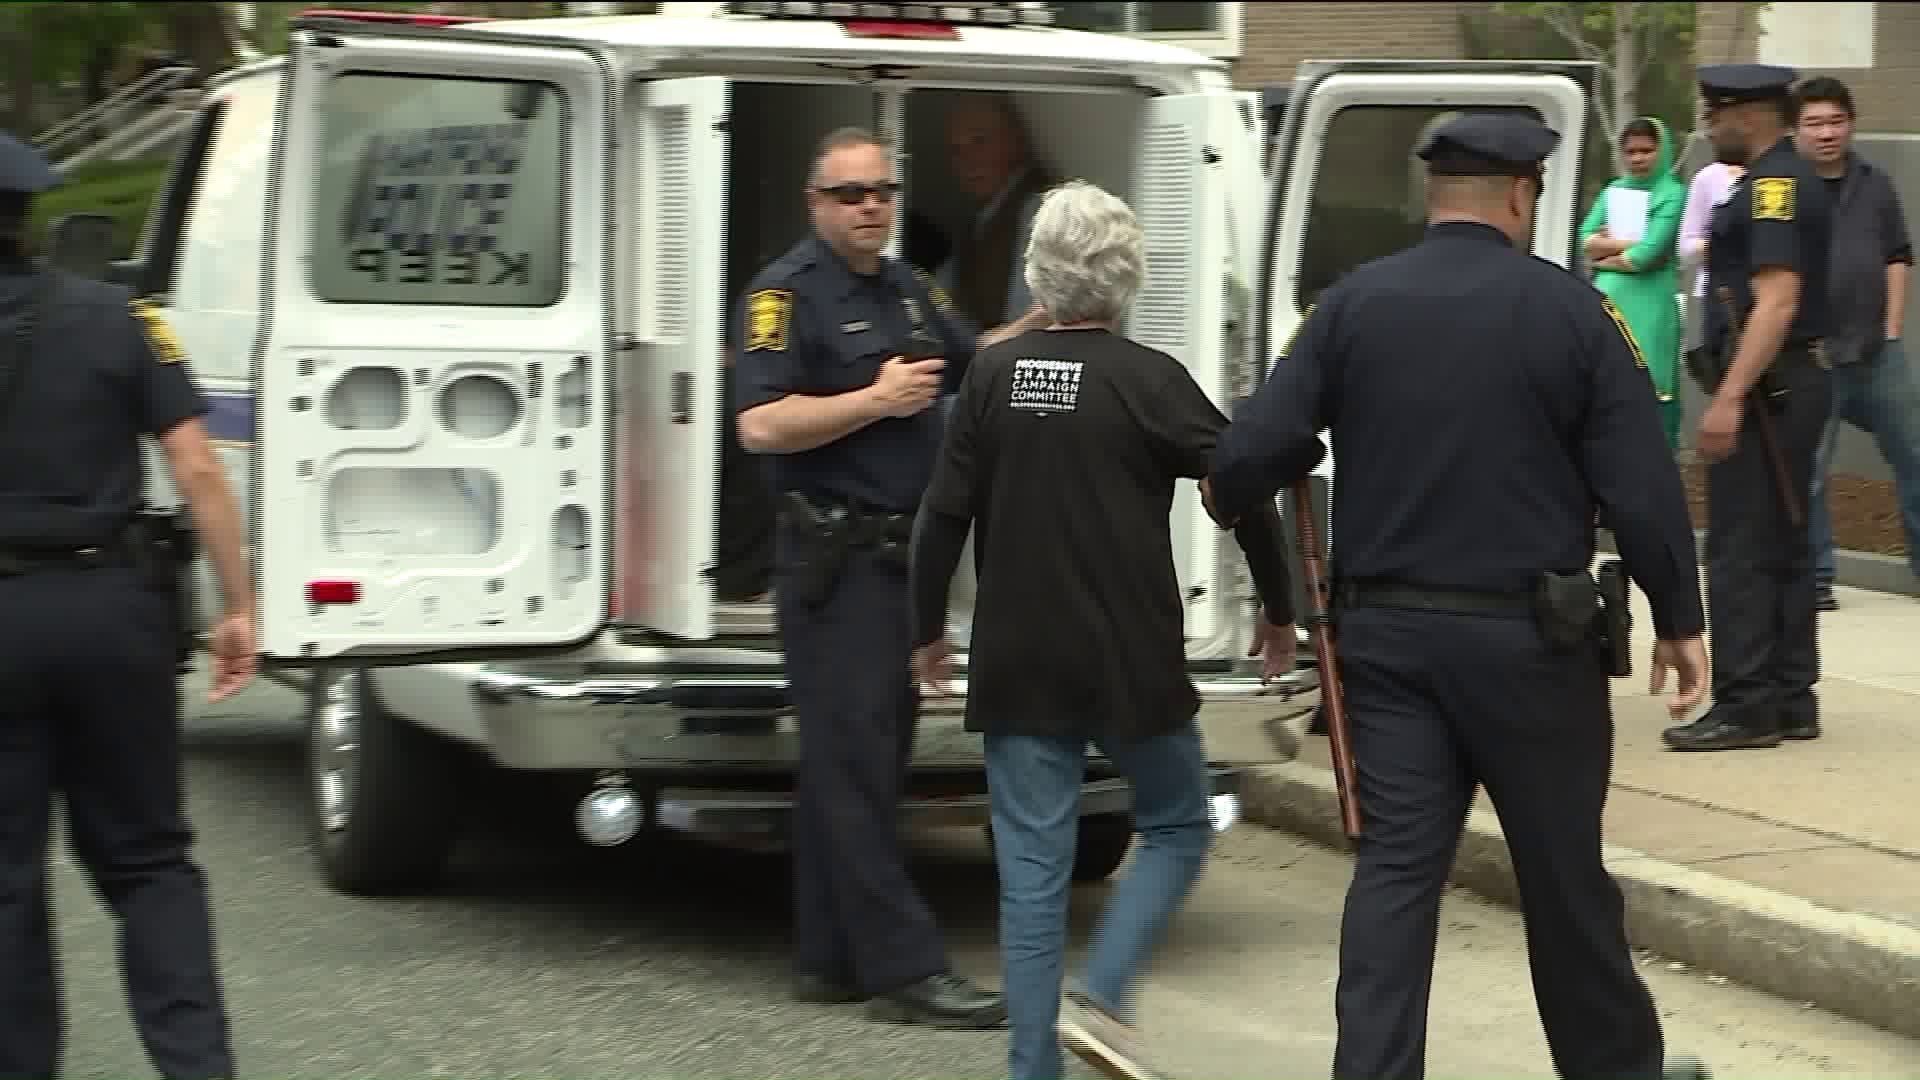 Protesters block entrance to federal building in Hartford; 19 arrested